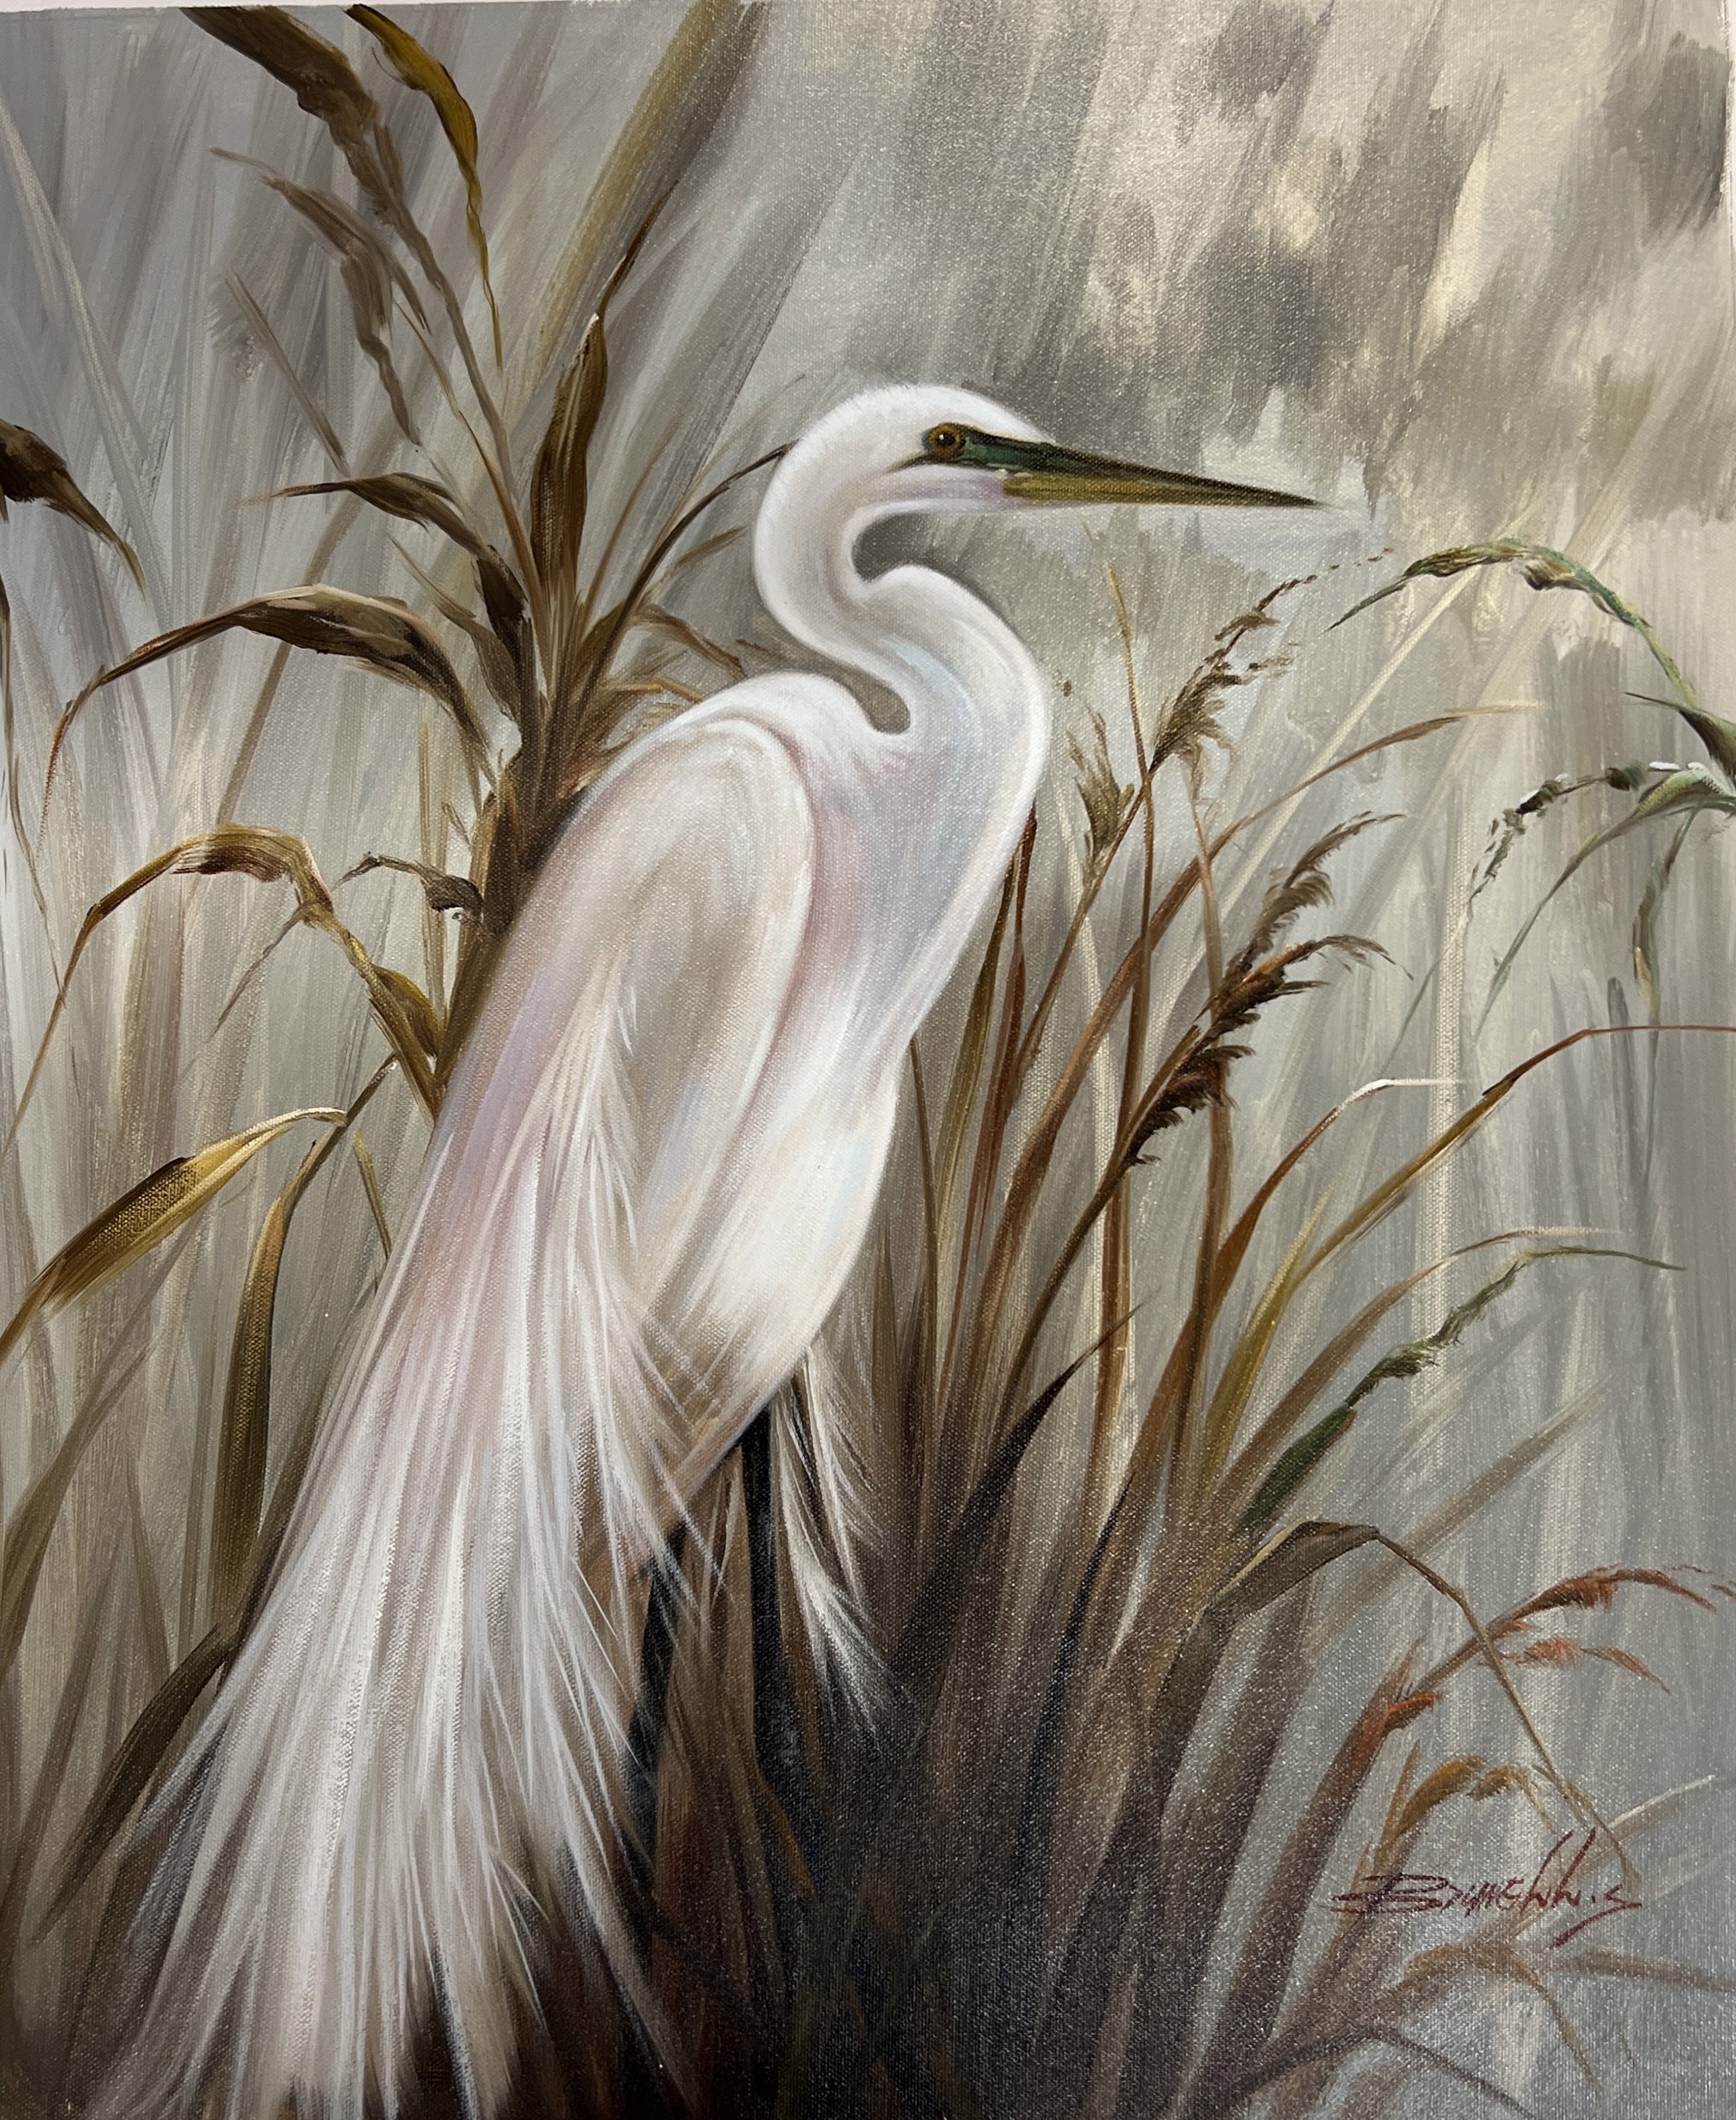 EGRET LOOKING RIGHT IN WARM TONES by BRUNELLY